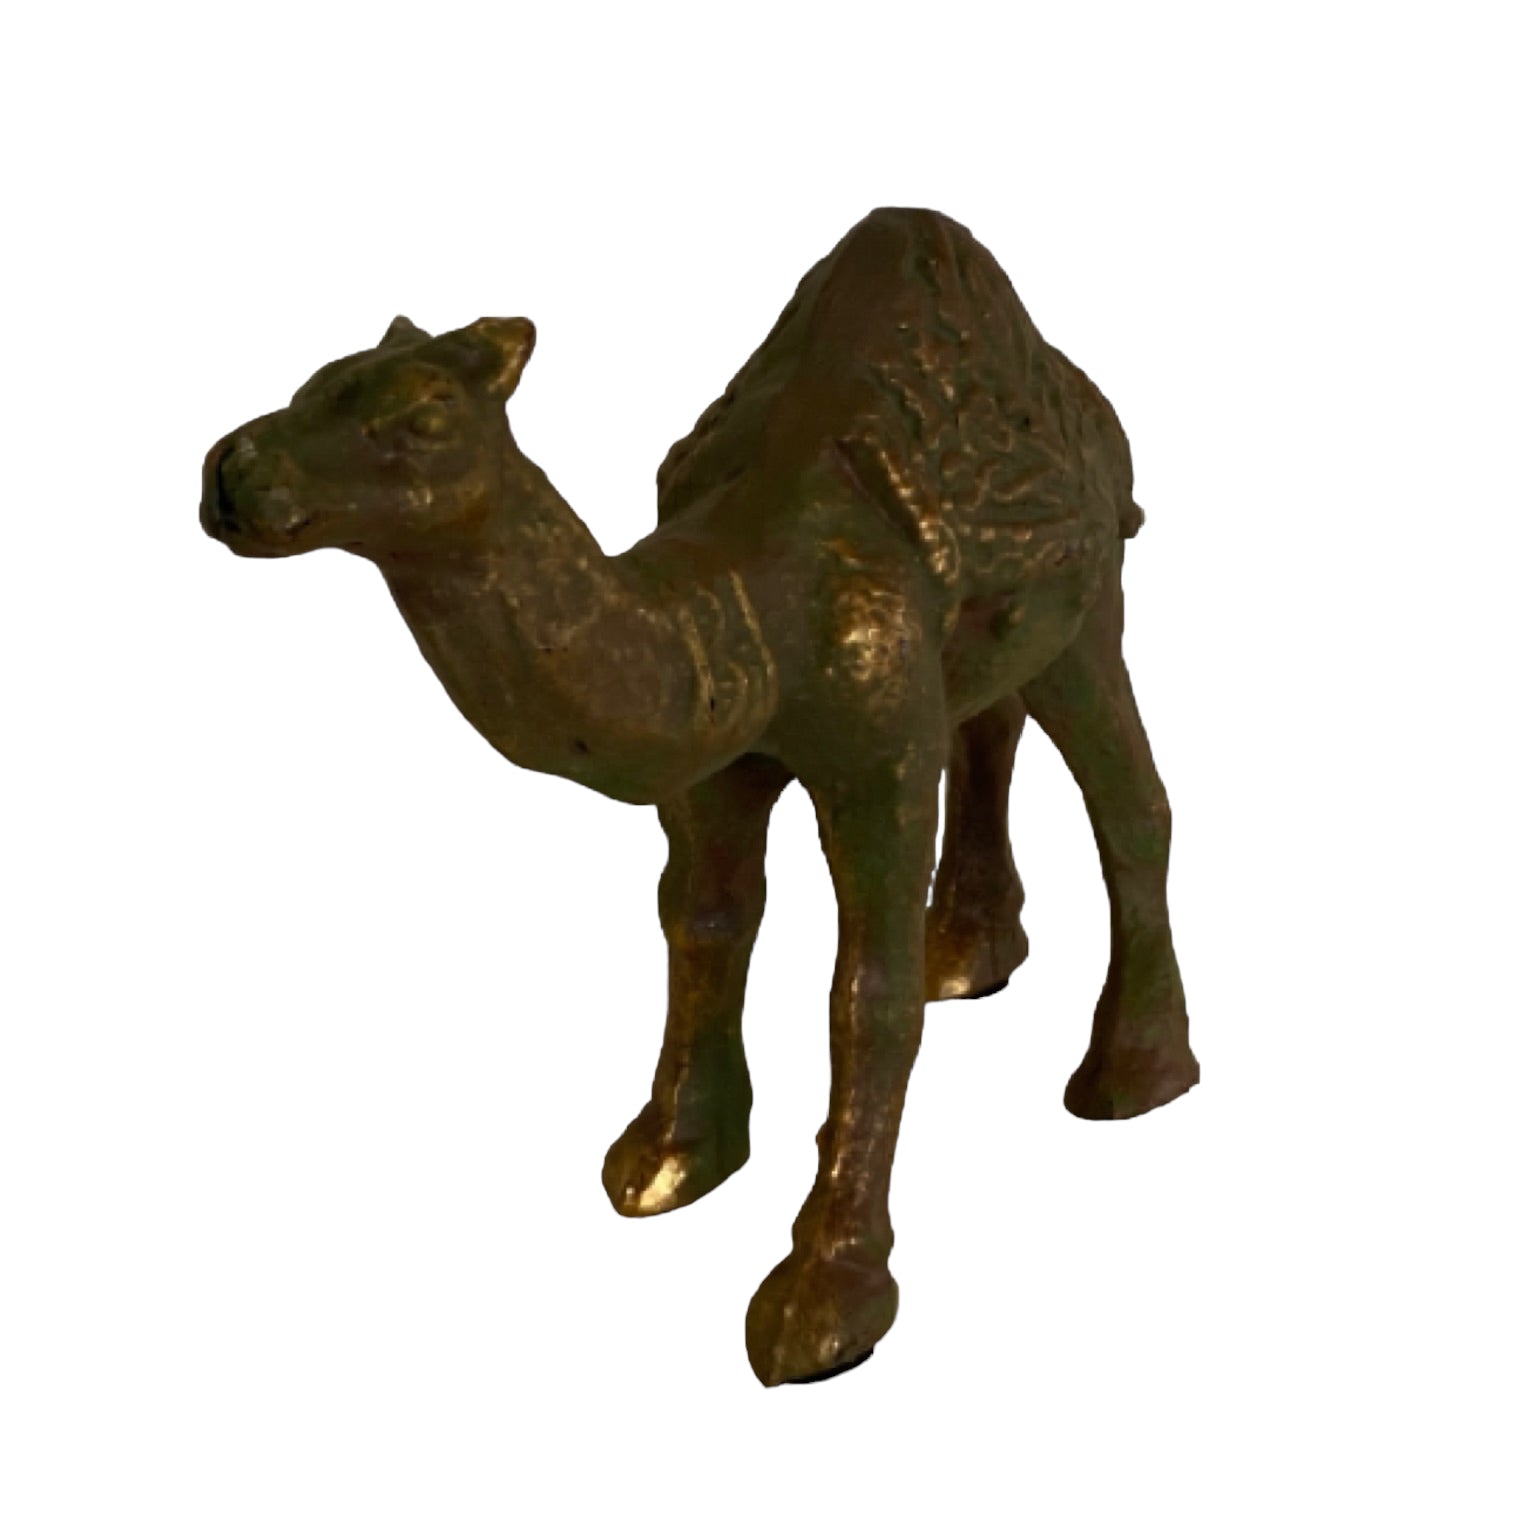 Camel Cast Iron Antique Ornament - The Renmy Store Homewares & Gifts 